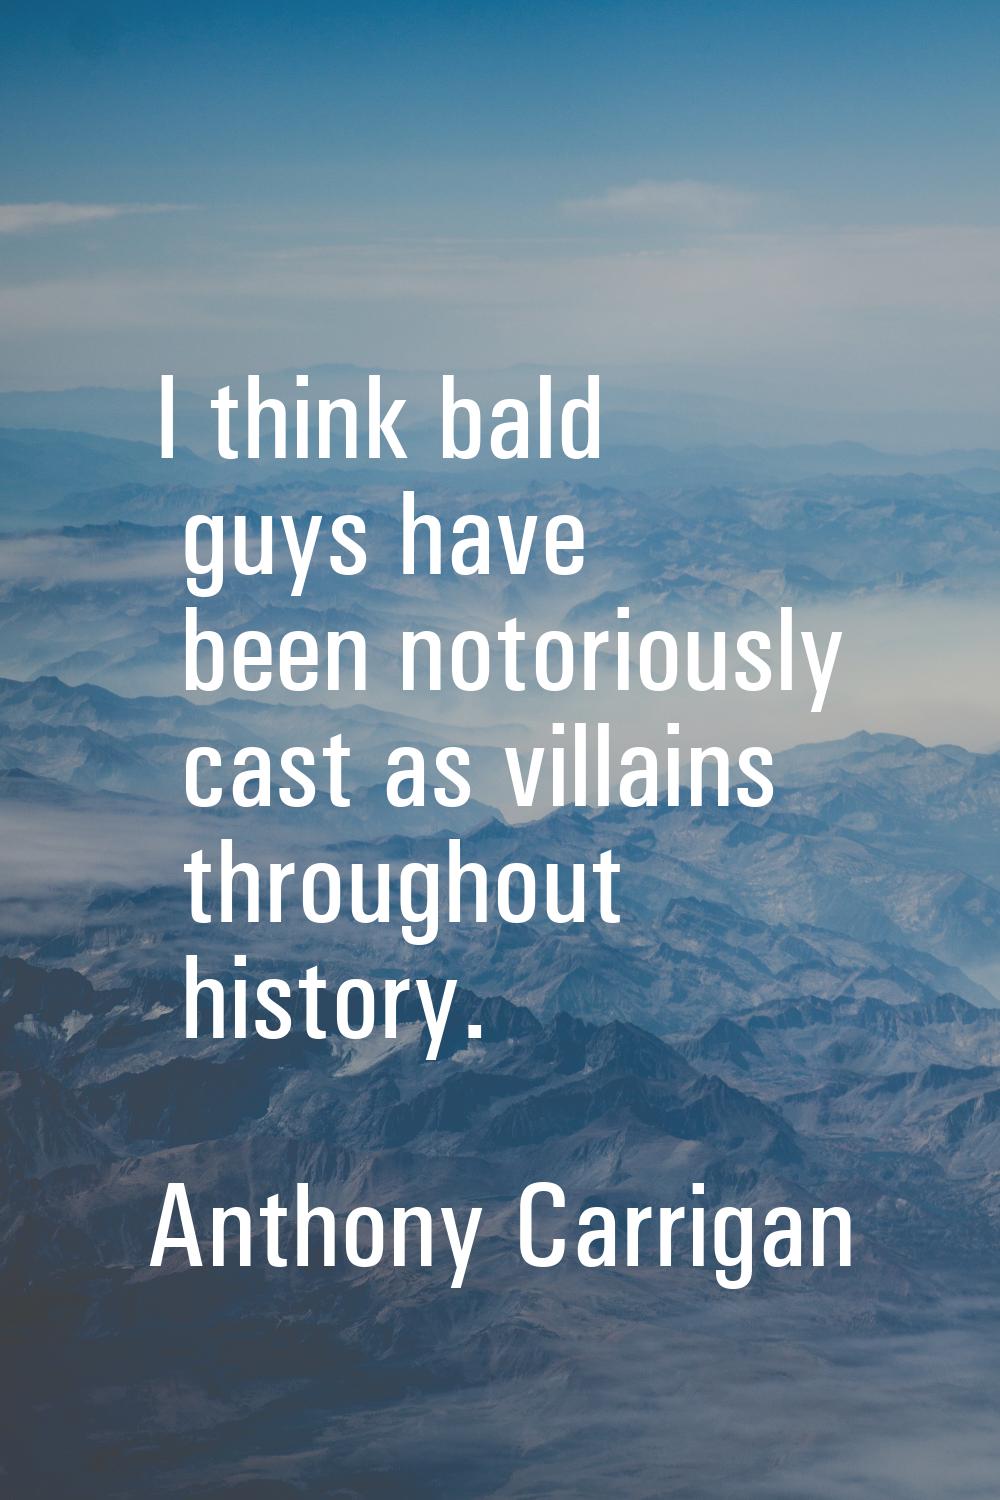 I think bald guys have been notoriously cast as villains throughout history.